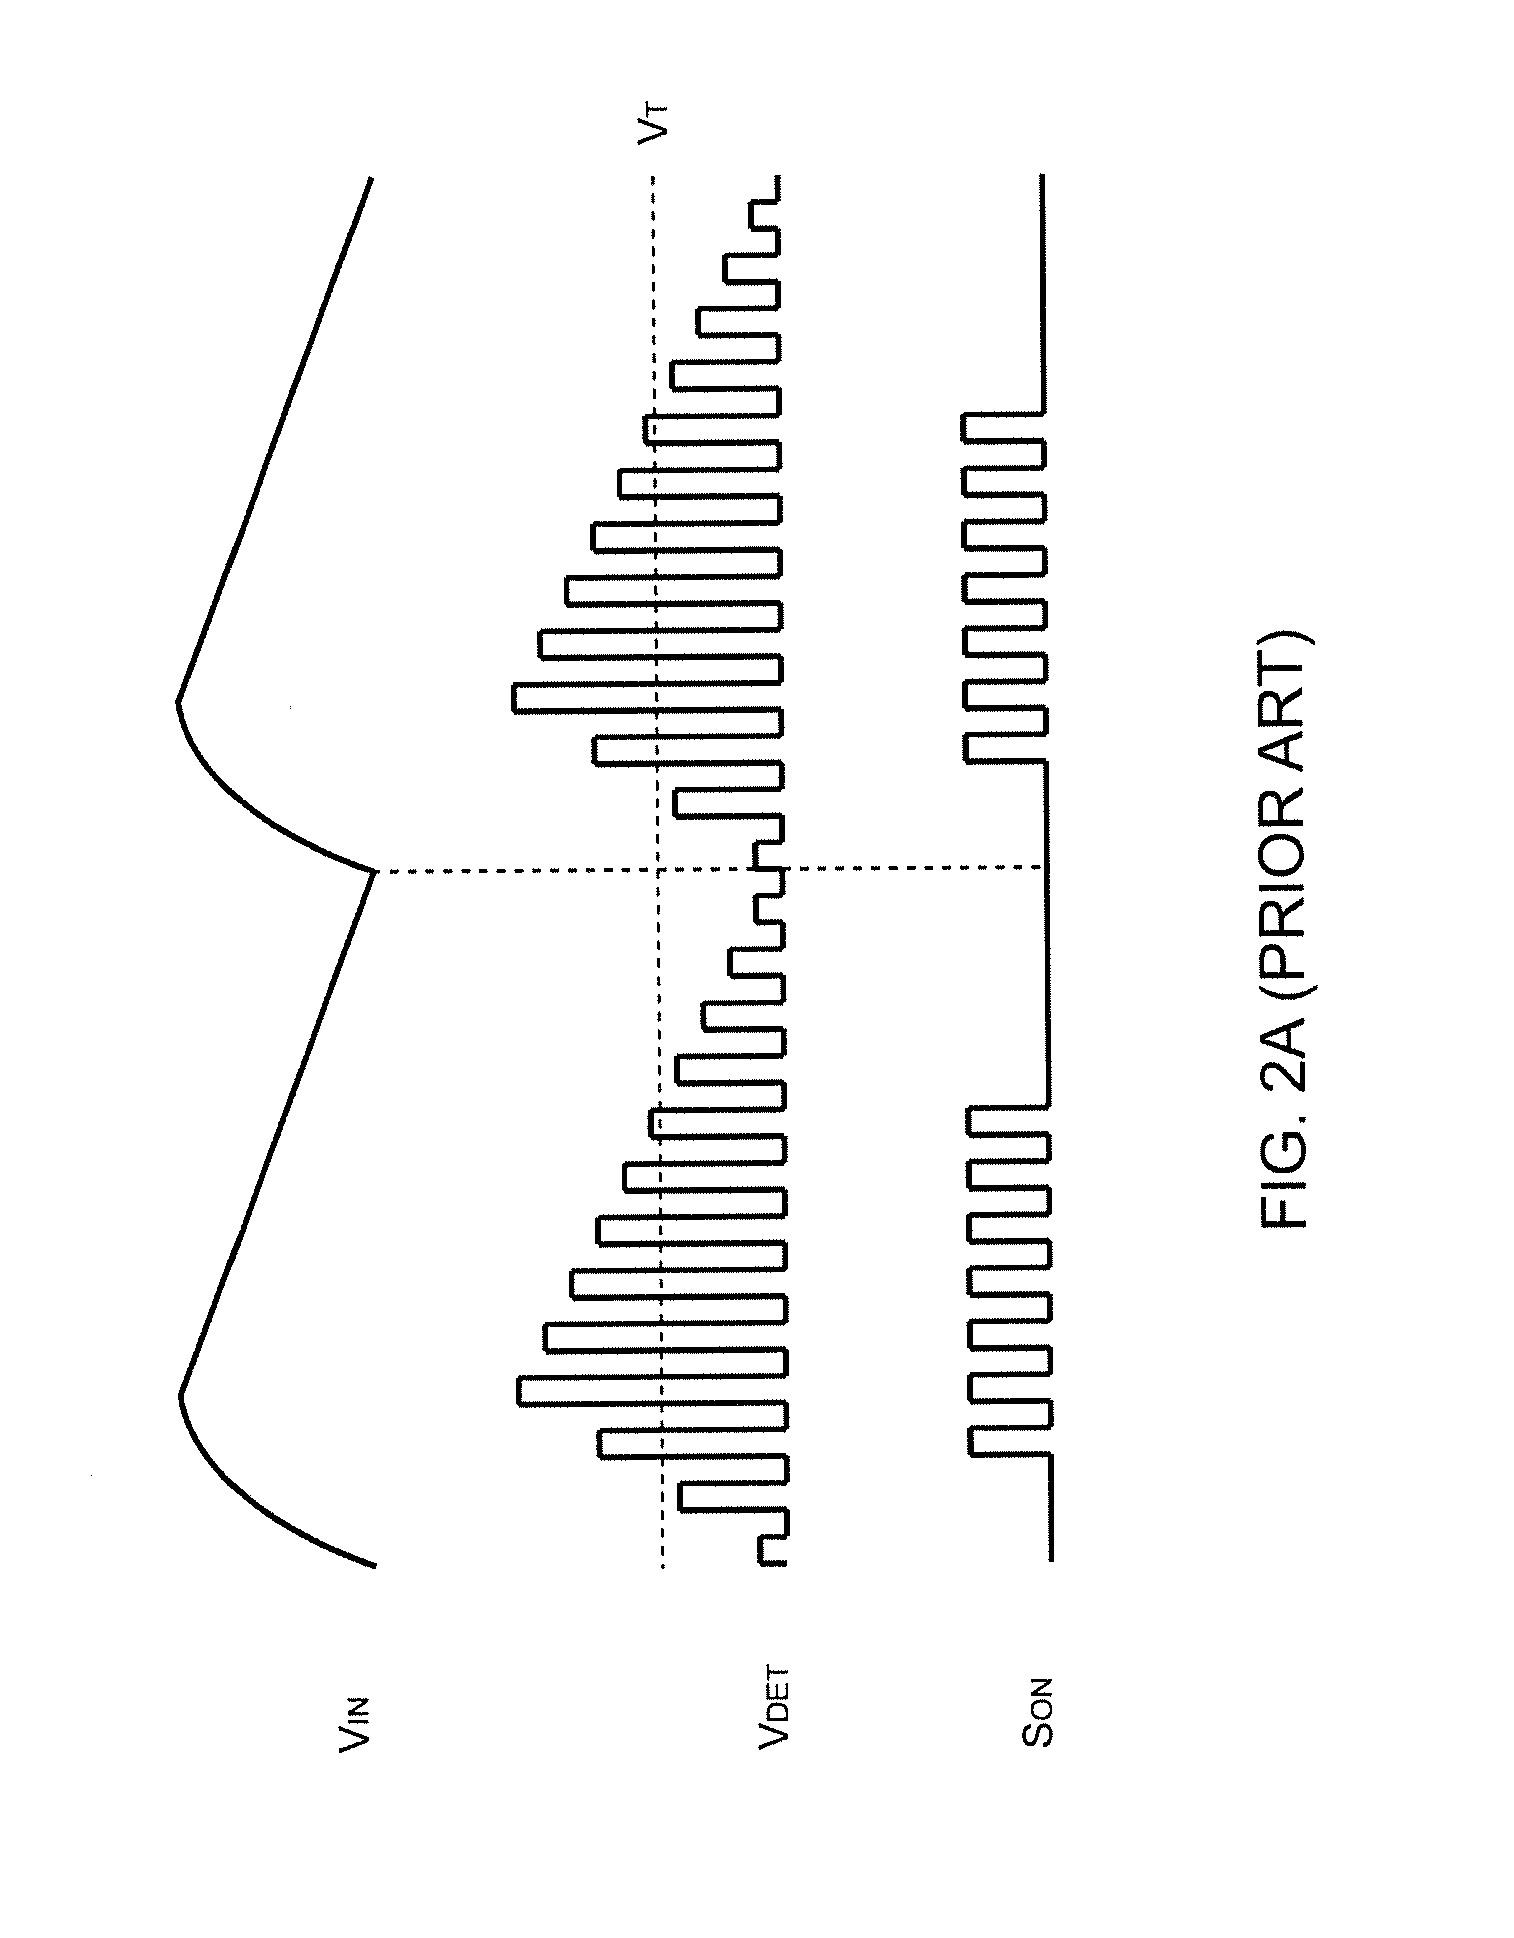 Adaptive synchronous rectification control method and apparatus